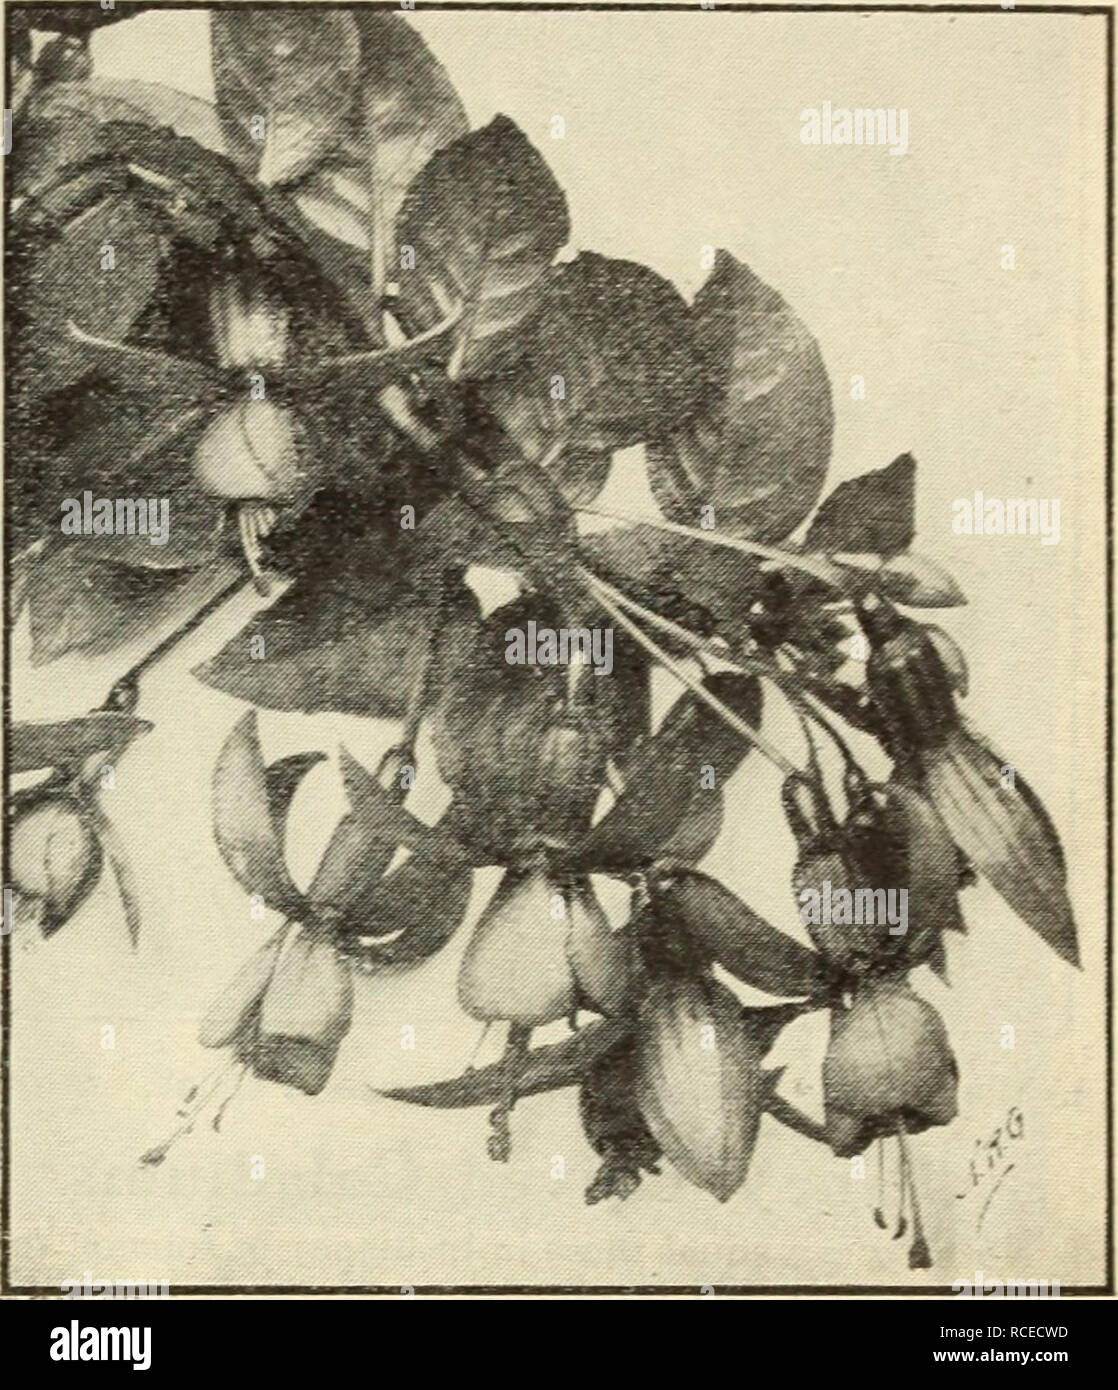 . Dingee guide to rose culture. '56?* 1909 ^^DuvGEE Guide To Rp5E lulture 2;&gt;^ Splendid Free-blooming Fuchsias l^'^^',o%^S&gt;^^ Fuchsia? inav ea&lt;ilv be counted amonsc the most popular house plants, in existence. They can be grown success- fully in any section of h:s country, and are equally well adapted to growing in pots during the winter or in beds, boxes or a ases in the garden during the sumrrier It shows its dainty beauty to best advantage as a pot plant. As such it blooms profusely and constantly. Our collection contains the choicest varieties and the extremely low prices at whic Stock Photo